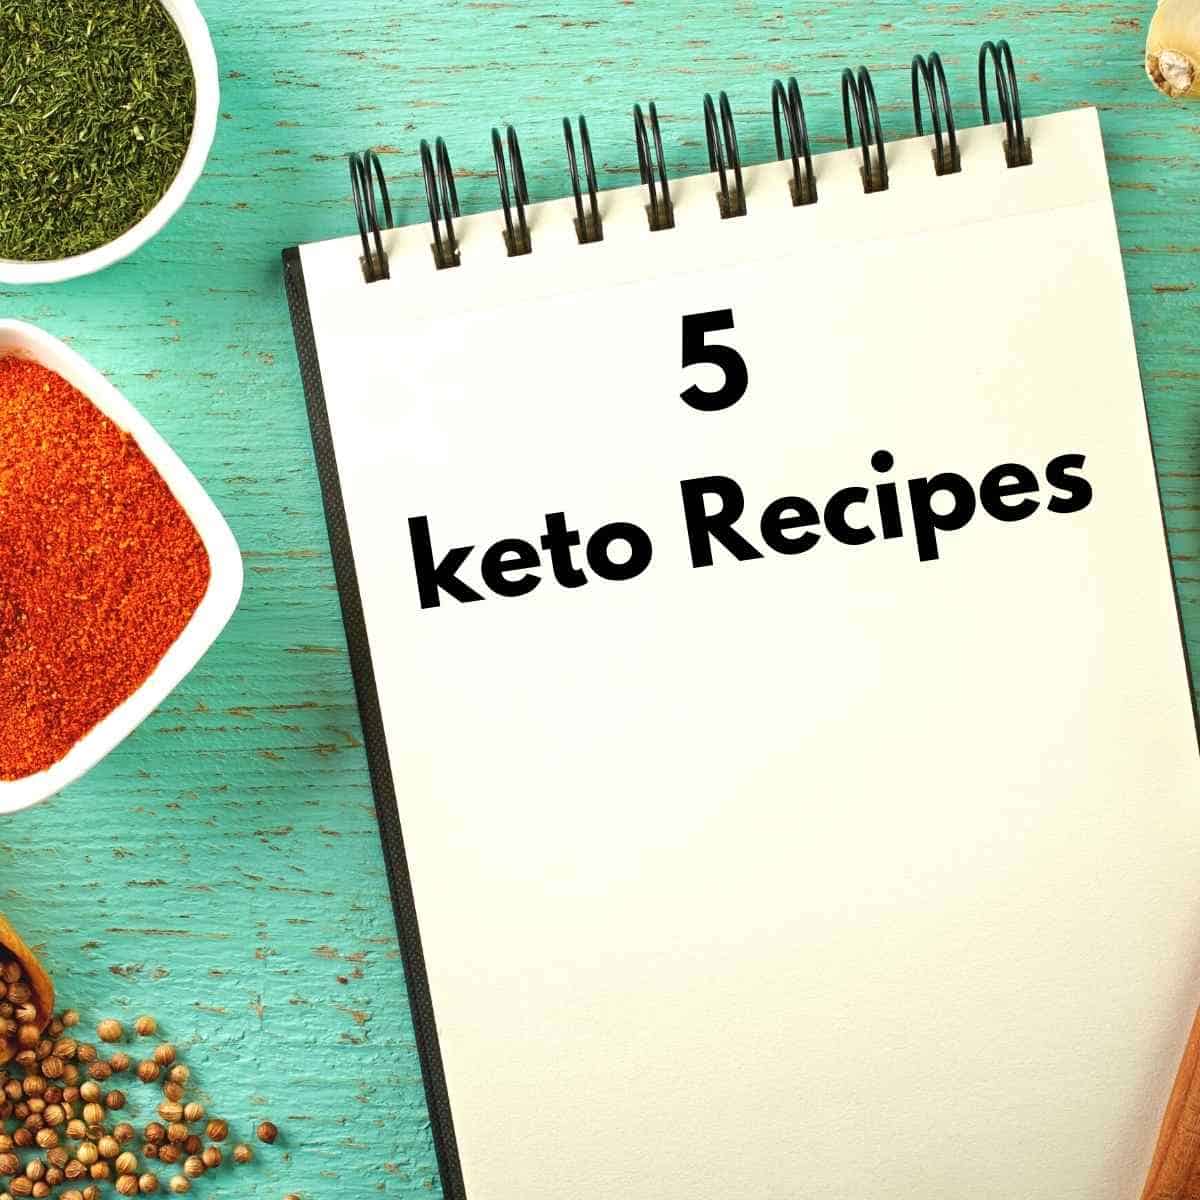 5 recipes to stay full - 5 Keto Recipes that Will Fill You Up